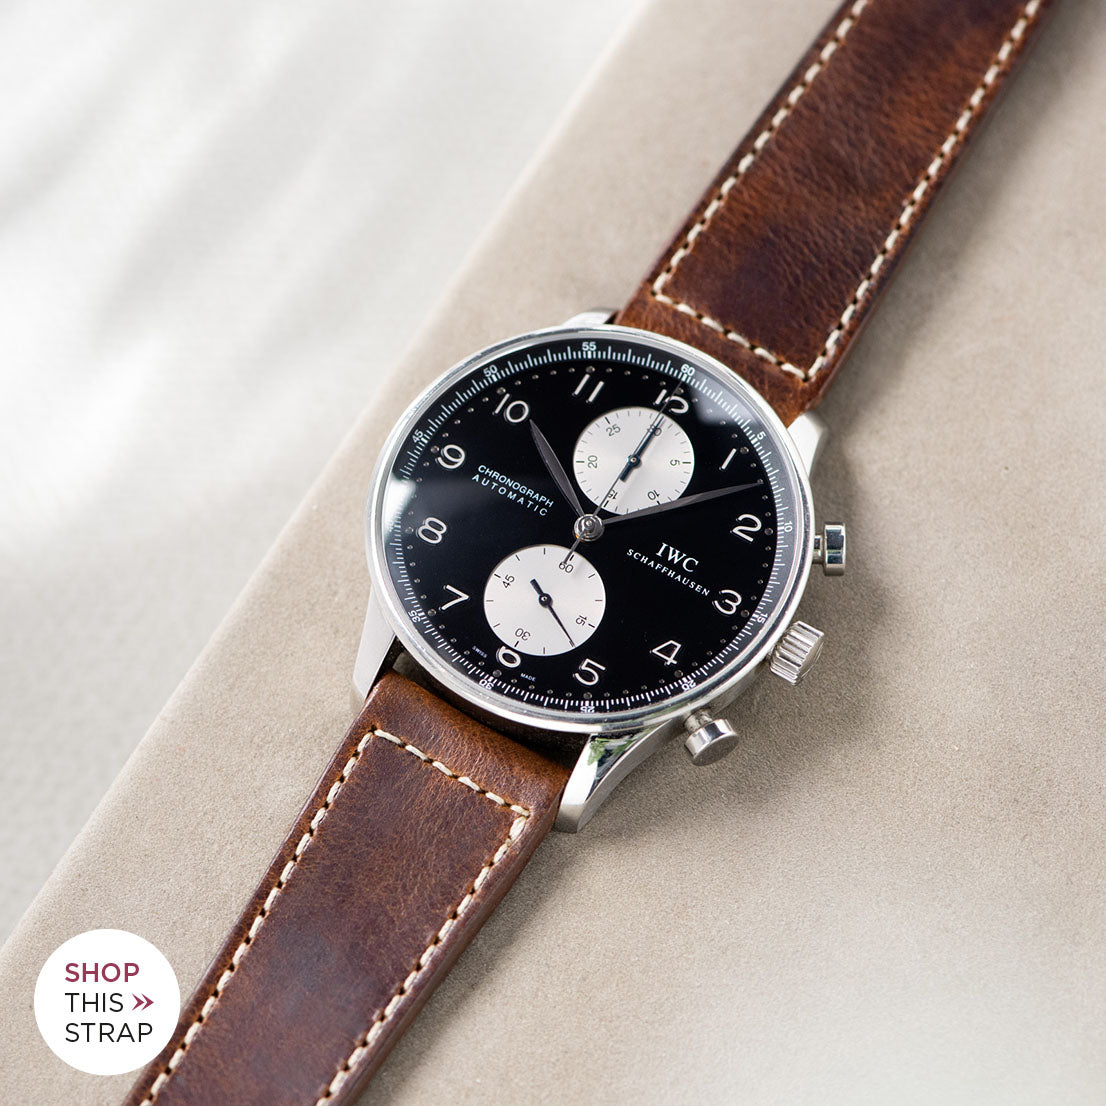 Bulang and Sons_Strap Guide_IWC-Portugieser_Siena Brown Boxed Stitch Leather Watch Strap